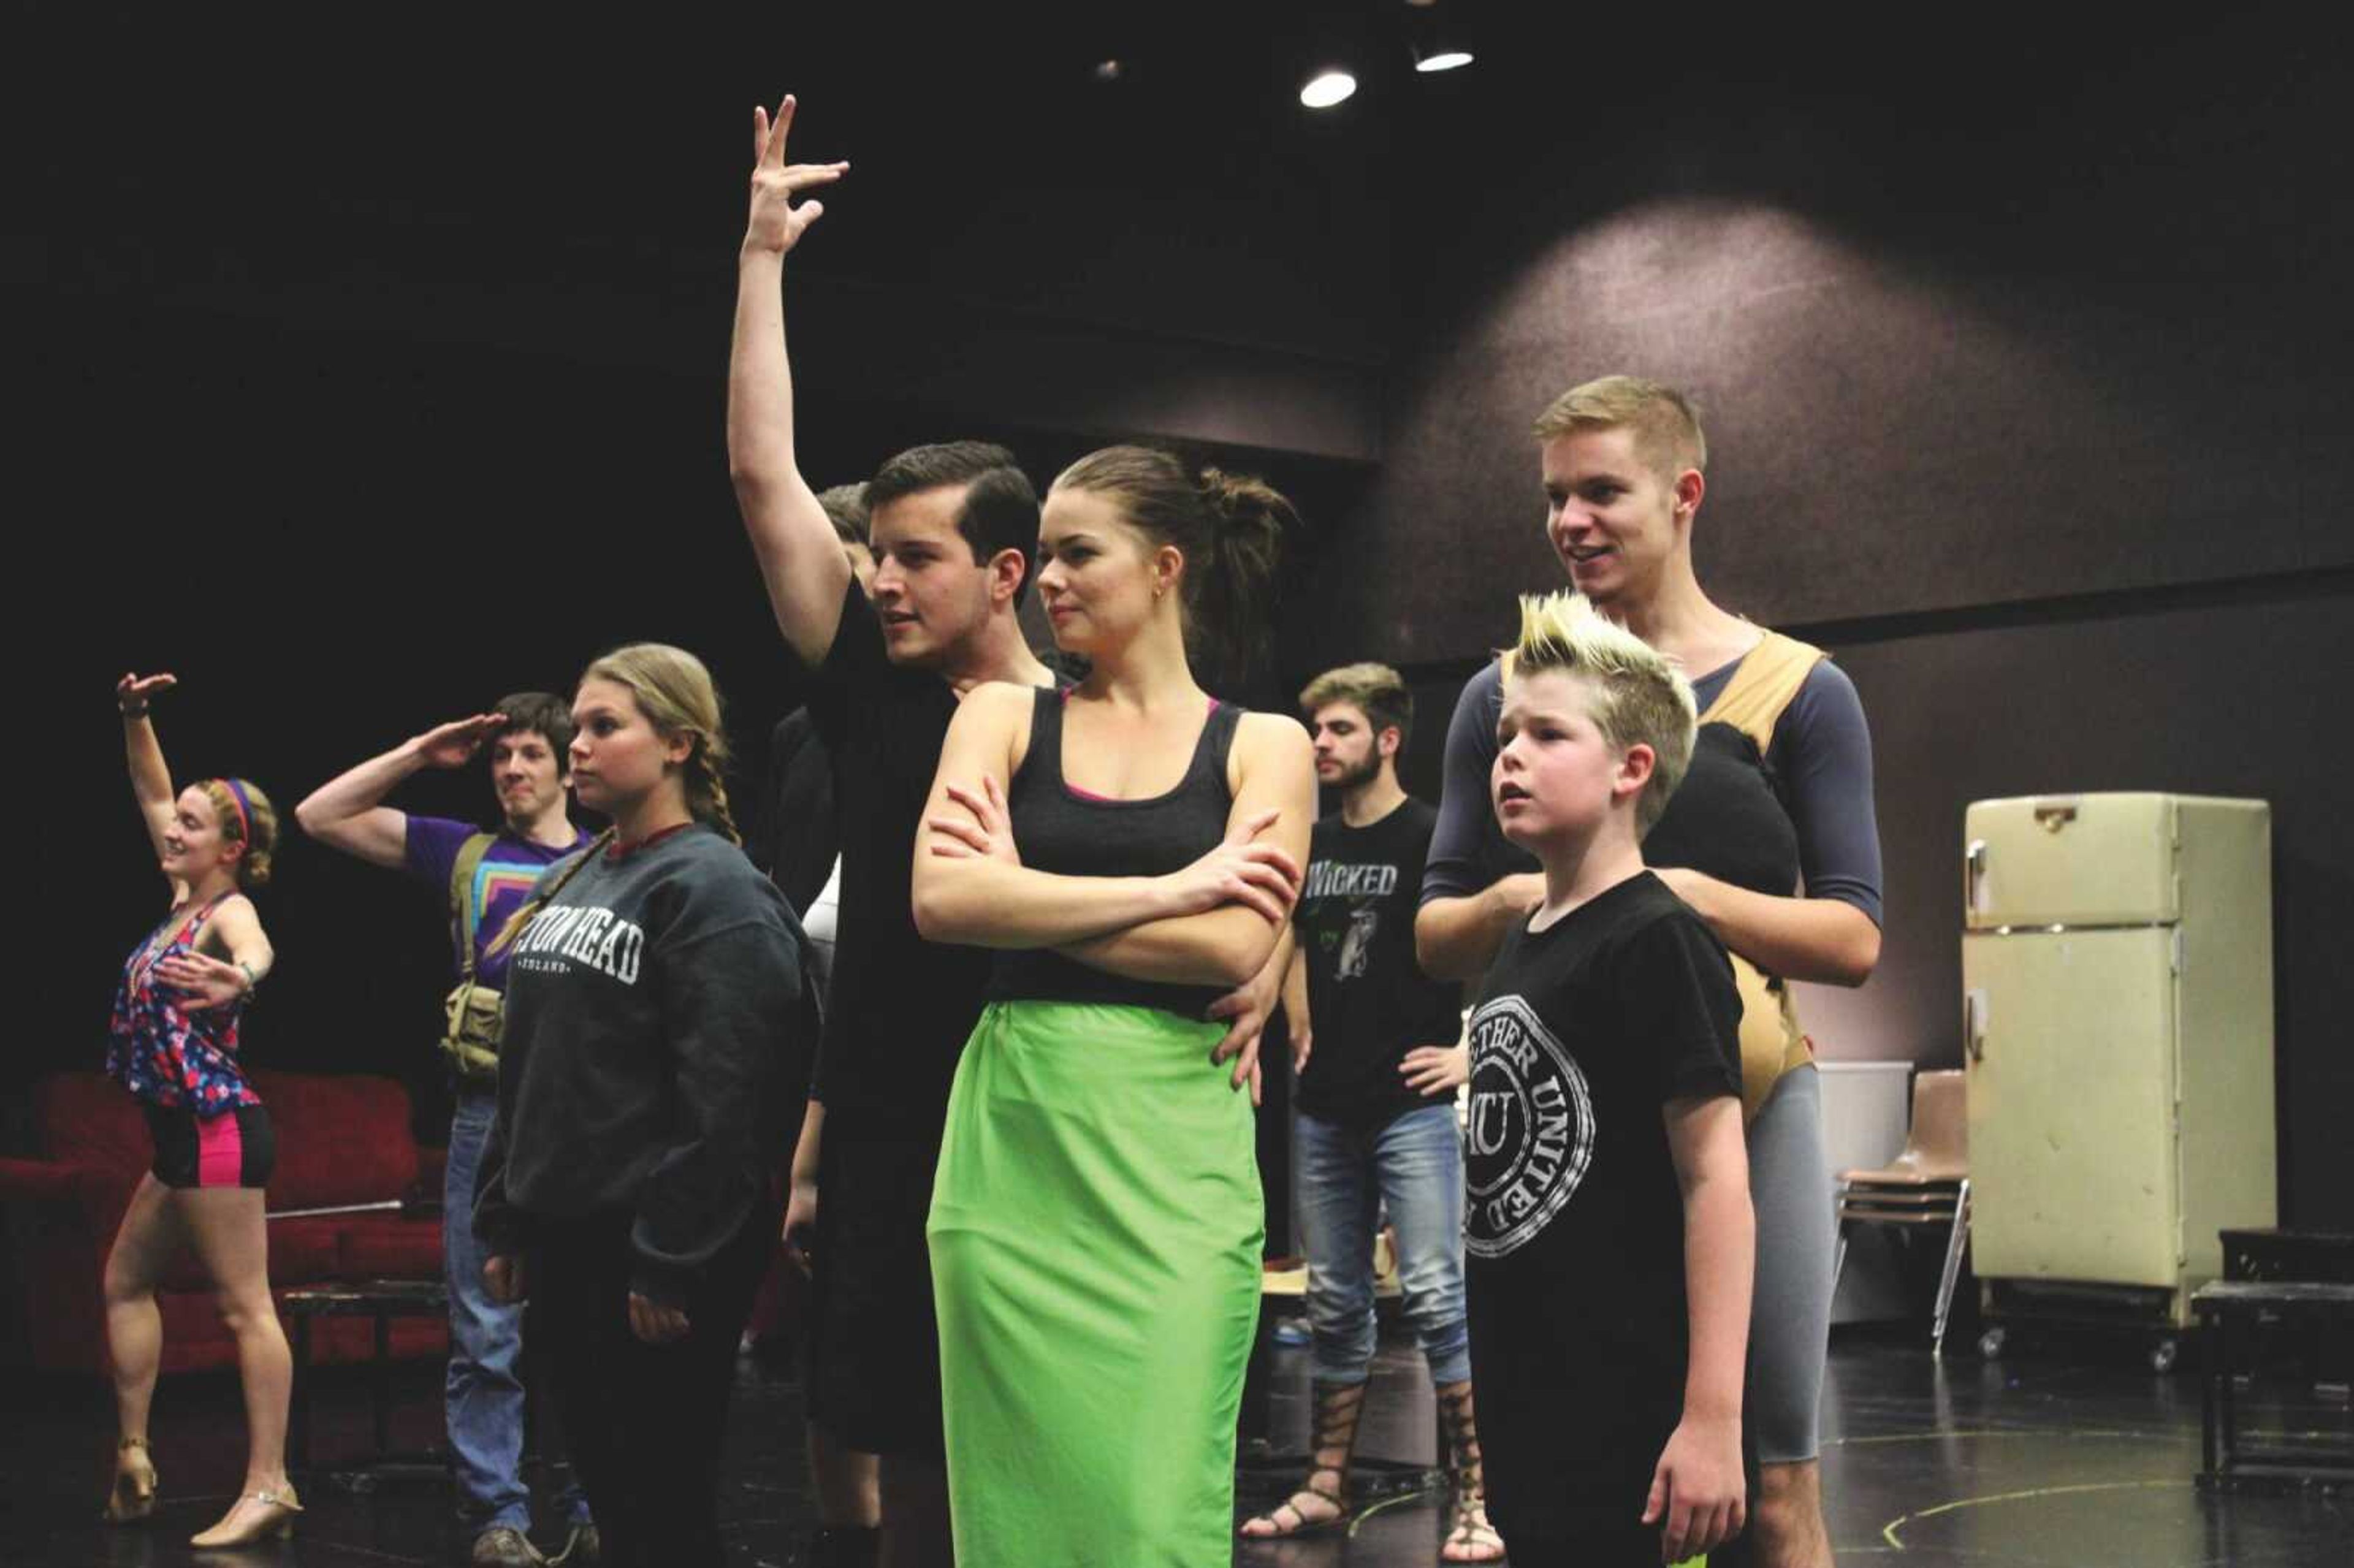 The cast rehearse "When You're An Addams" at the River Campus.